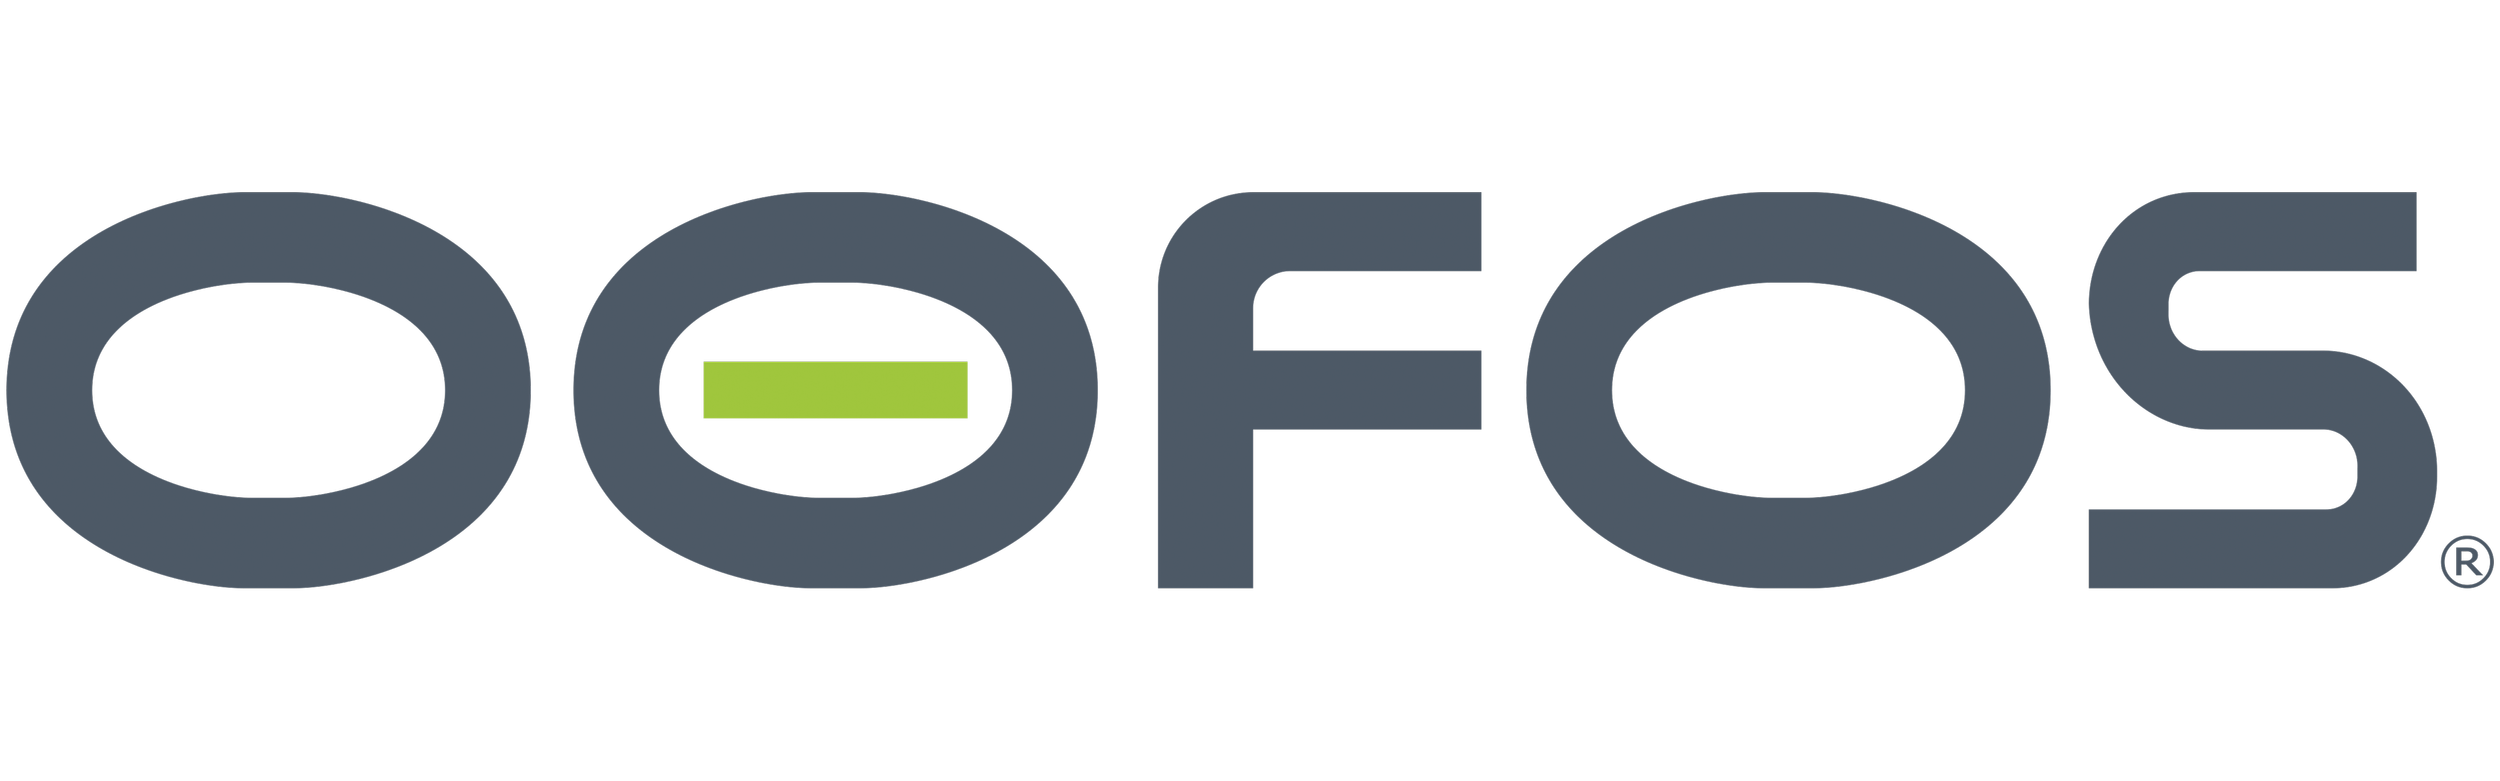 OOFOS_primary_logo (18).png